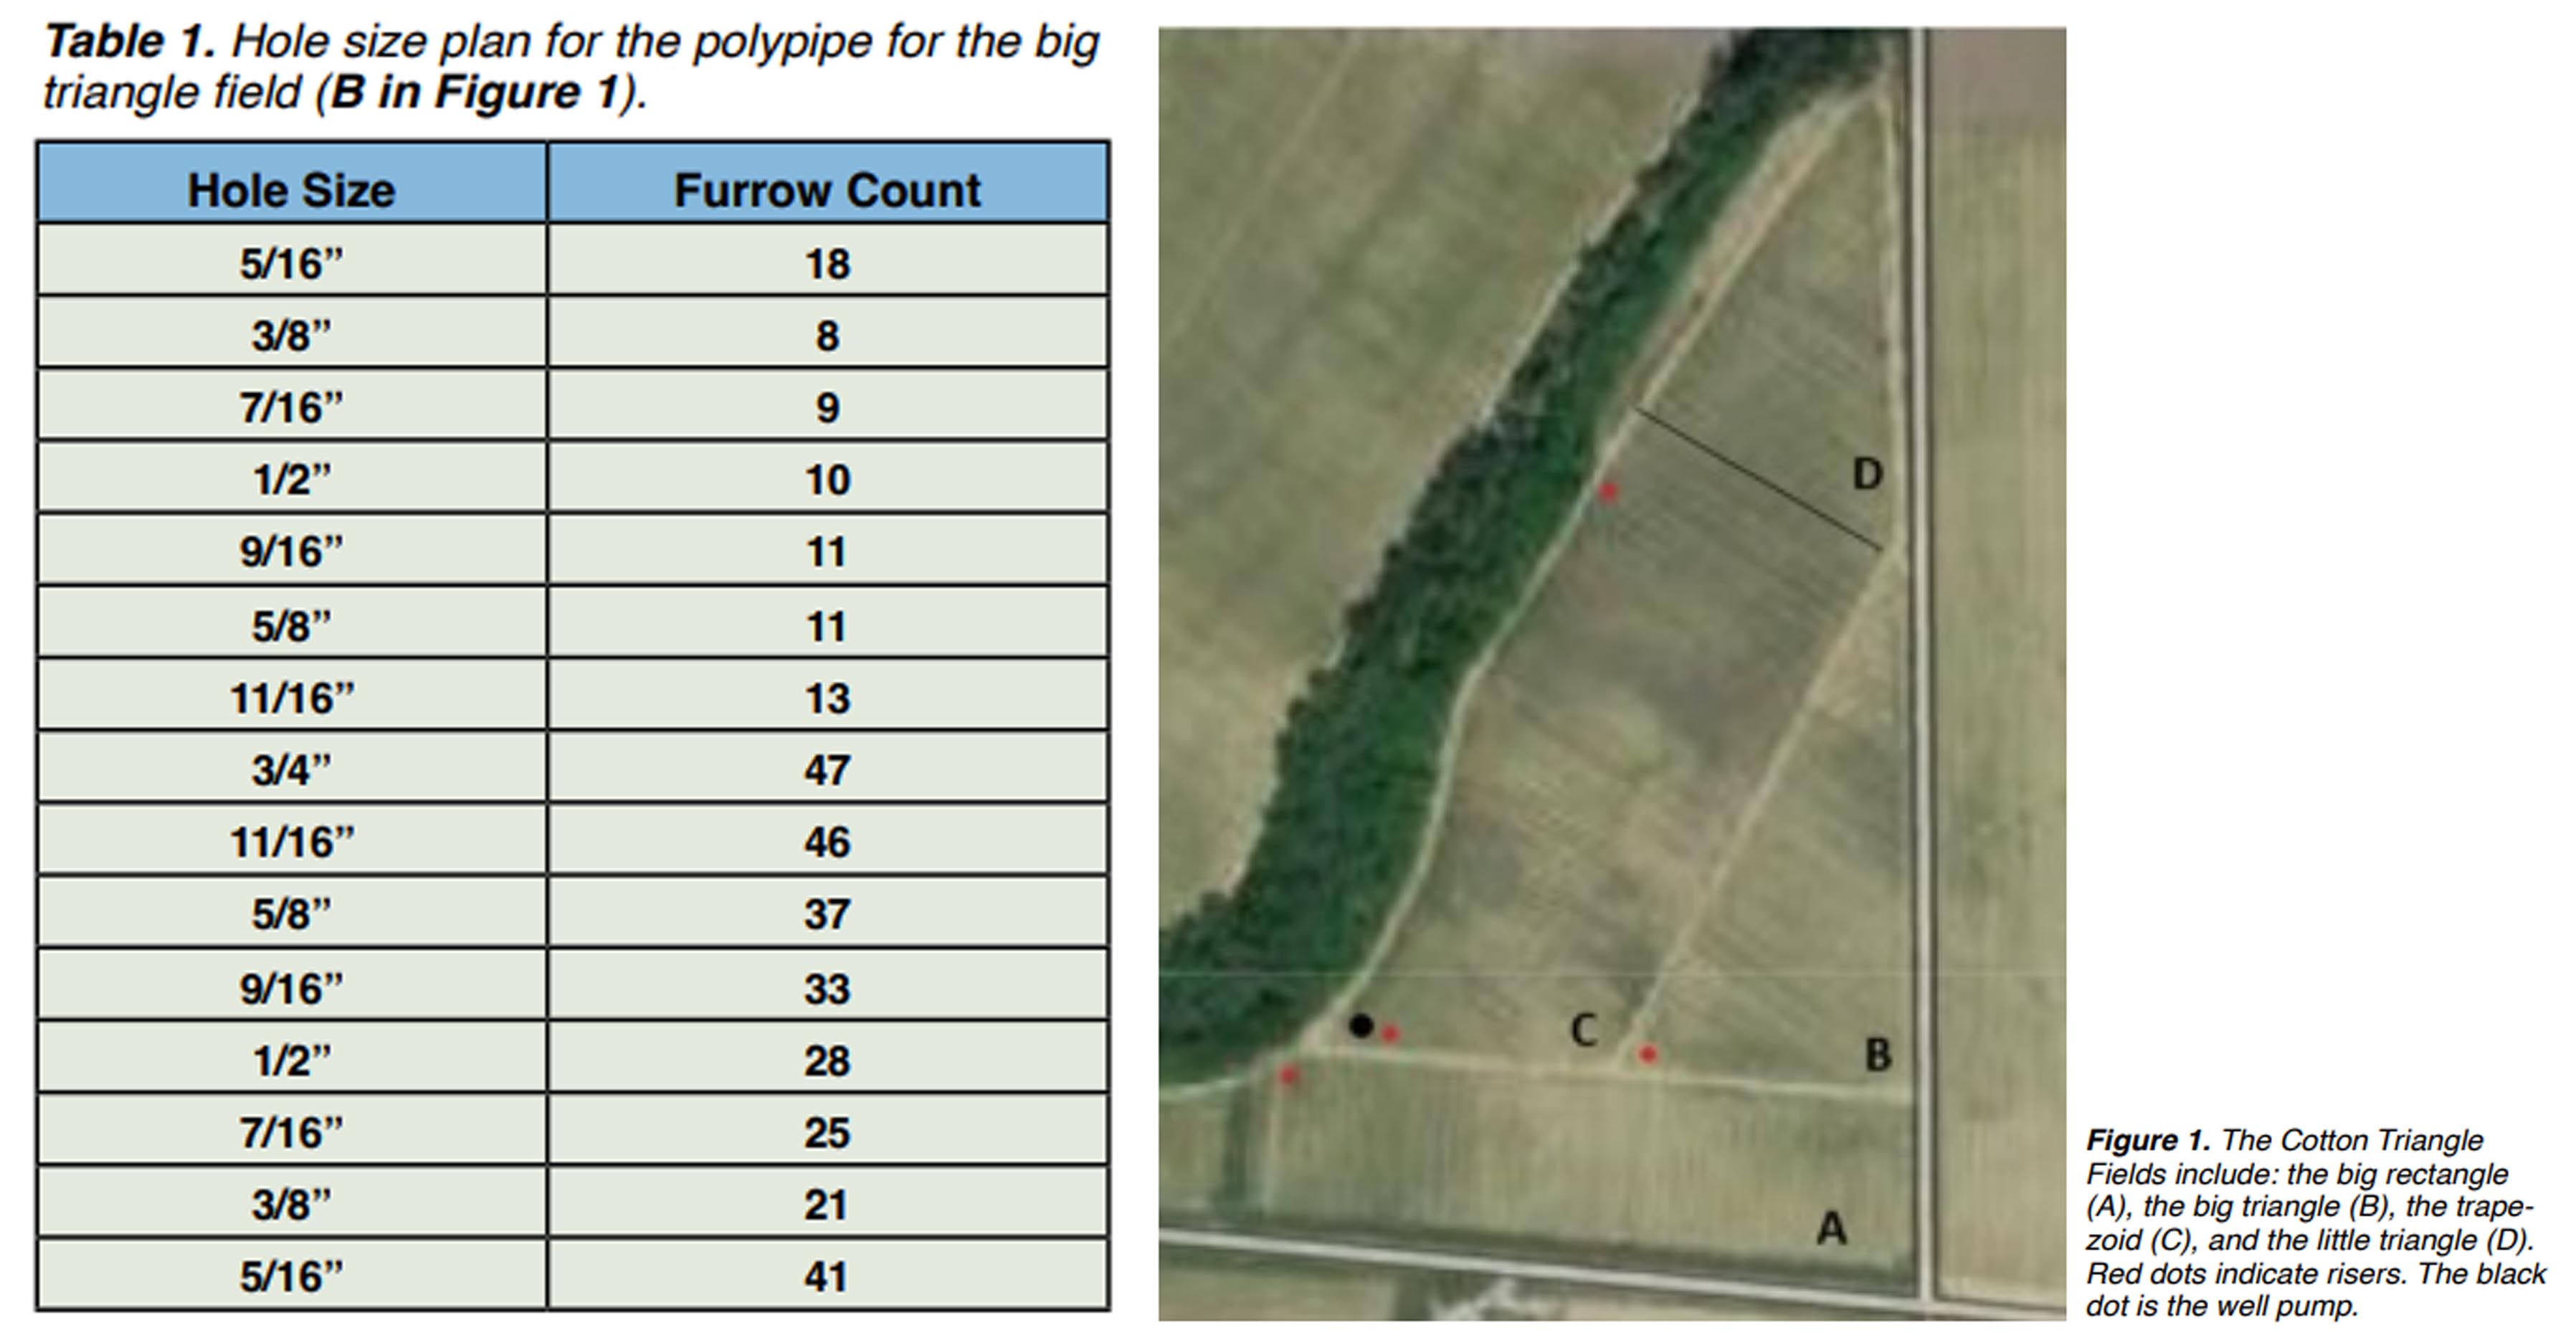 Determining how polypipe hole size and field shape
impacts cotton water use and yield